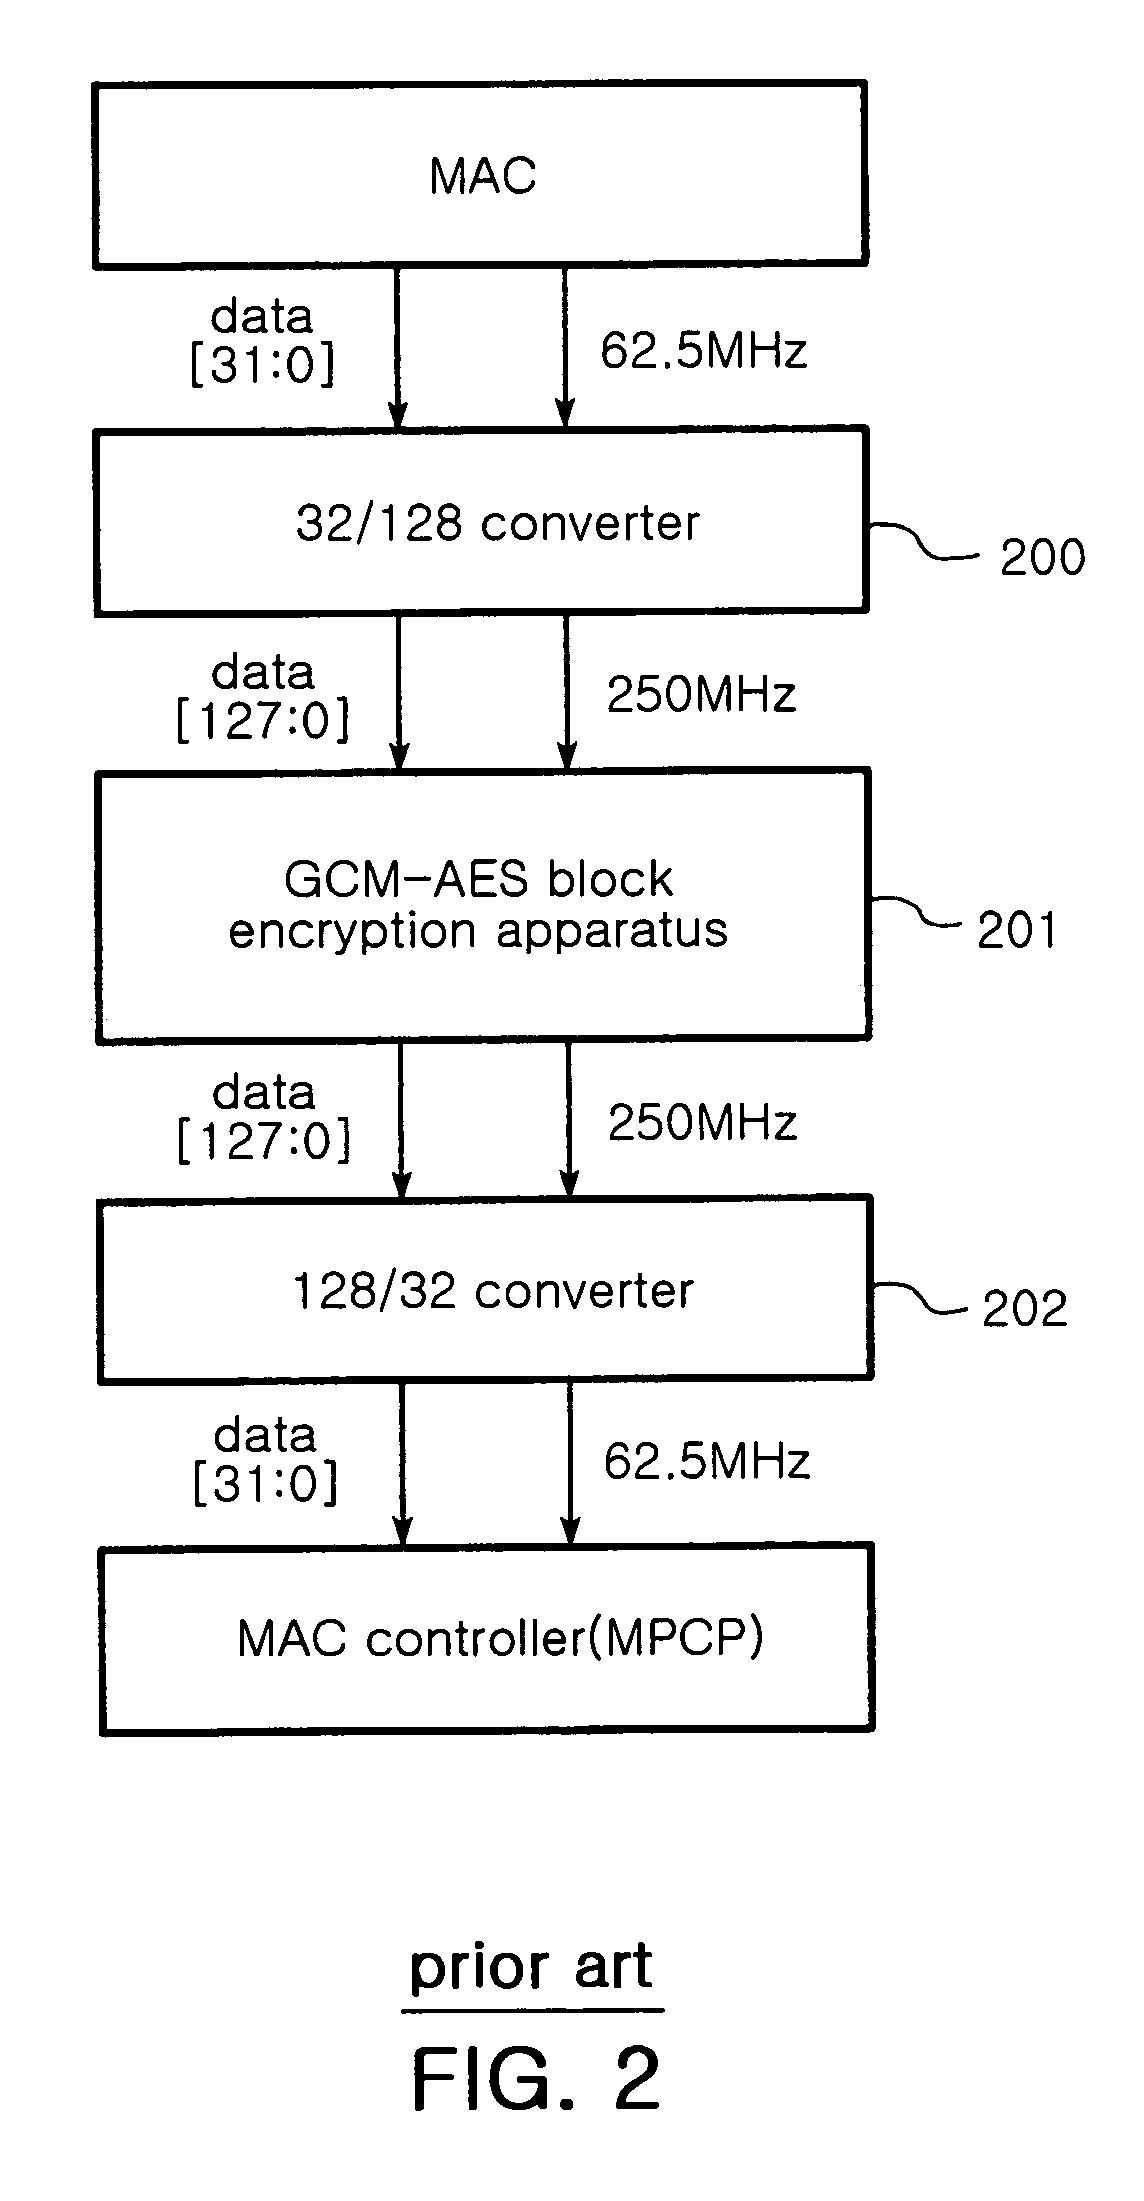 High-speed GCM-AES block cipher apparatus and method